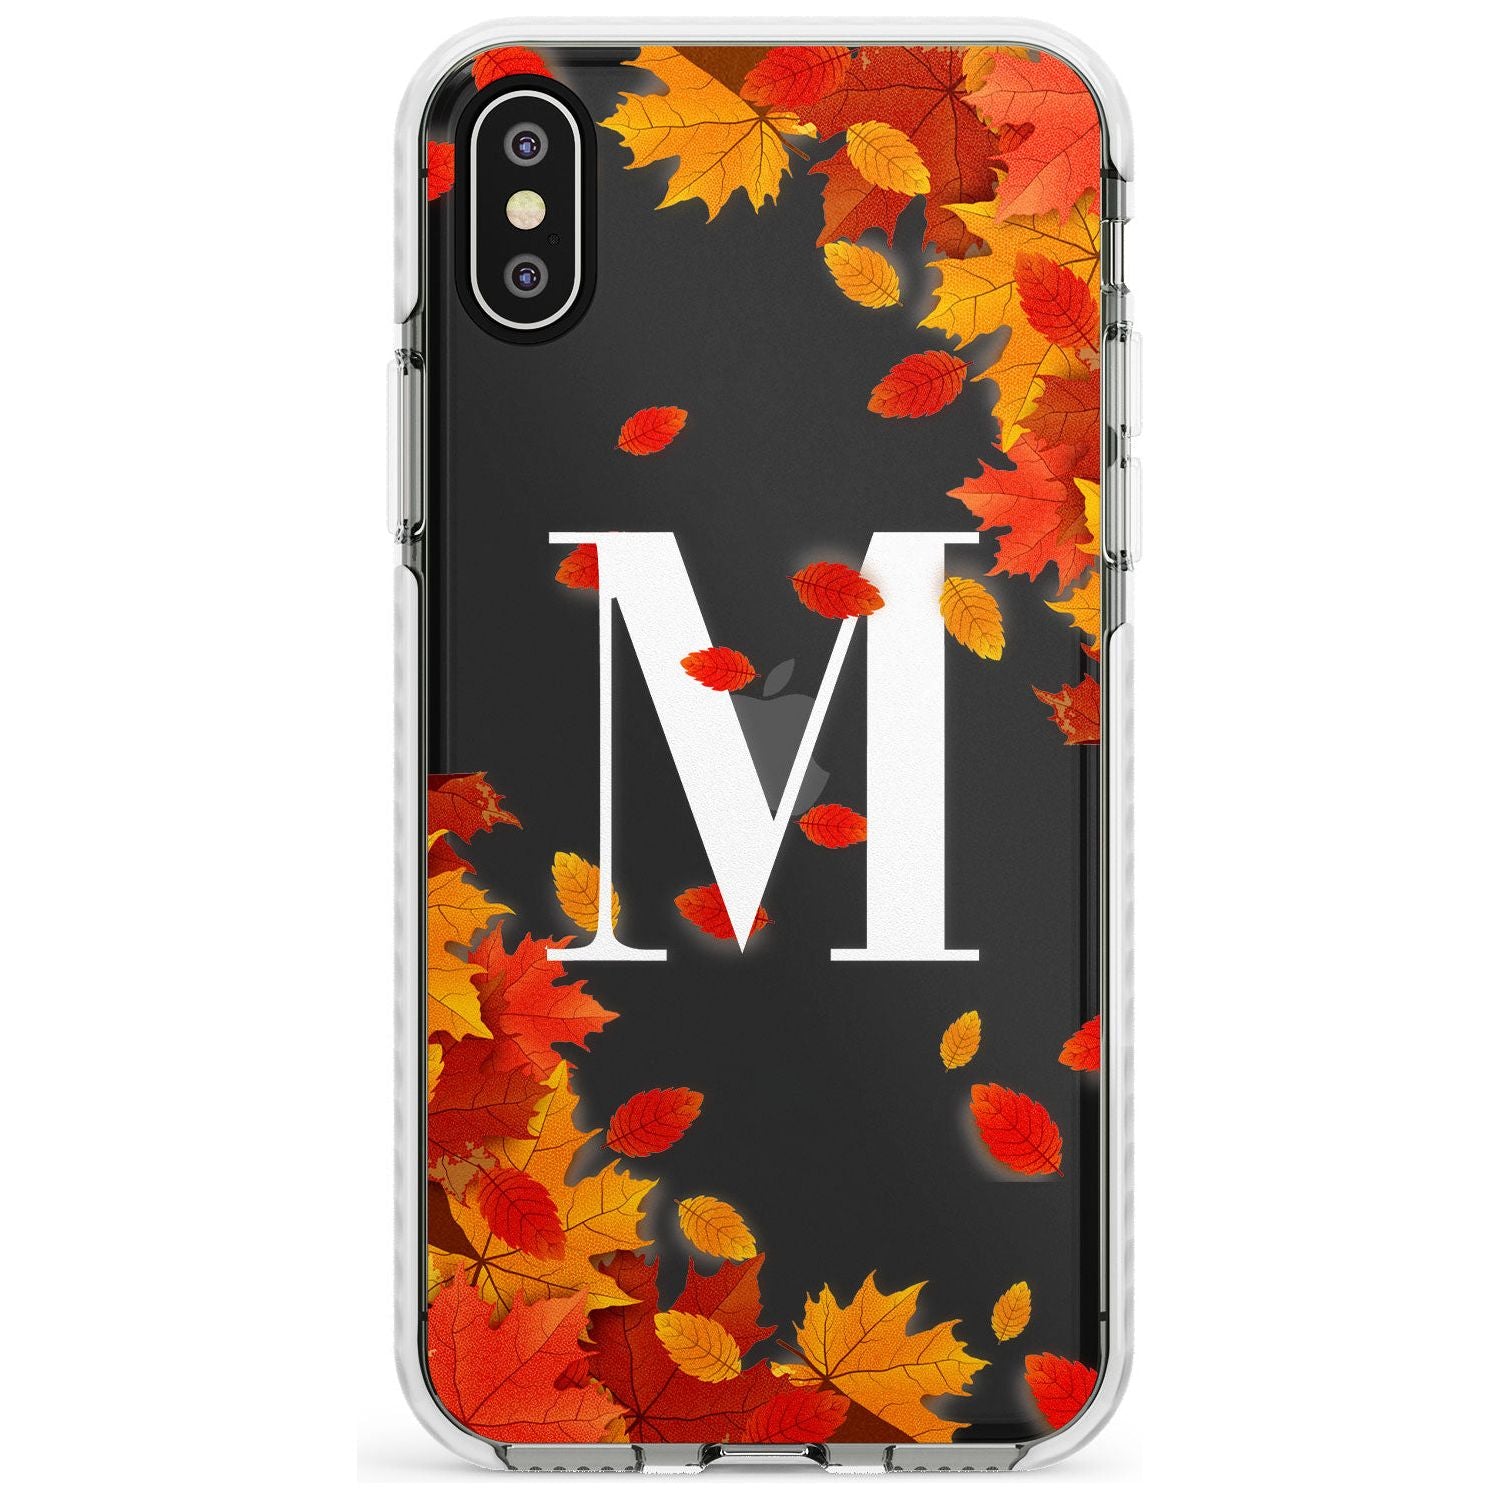 Personalised Monogram Autumn Leaves Impact Phone Case for iPhone X XS Max XR